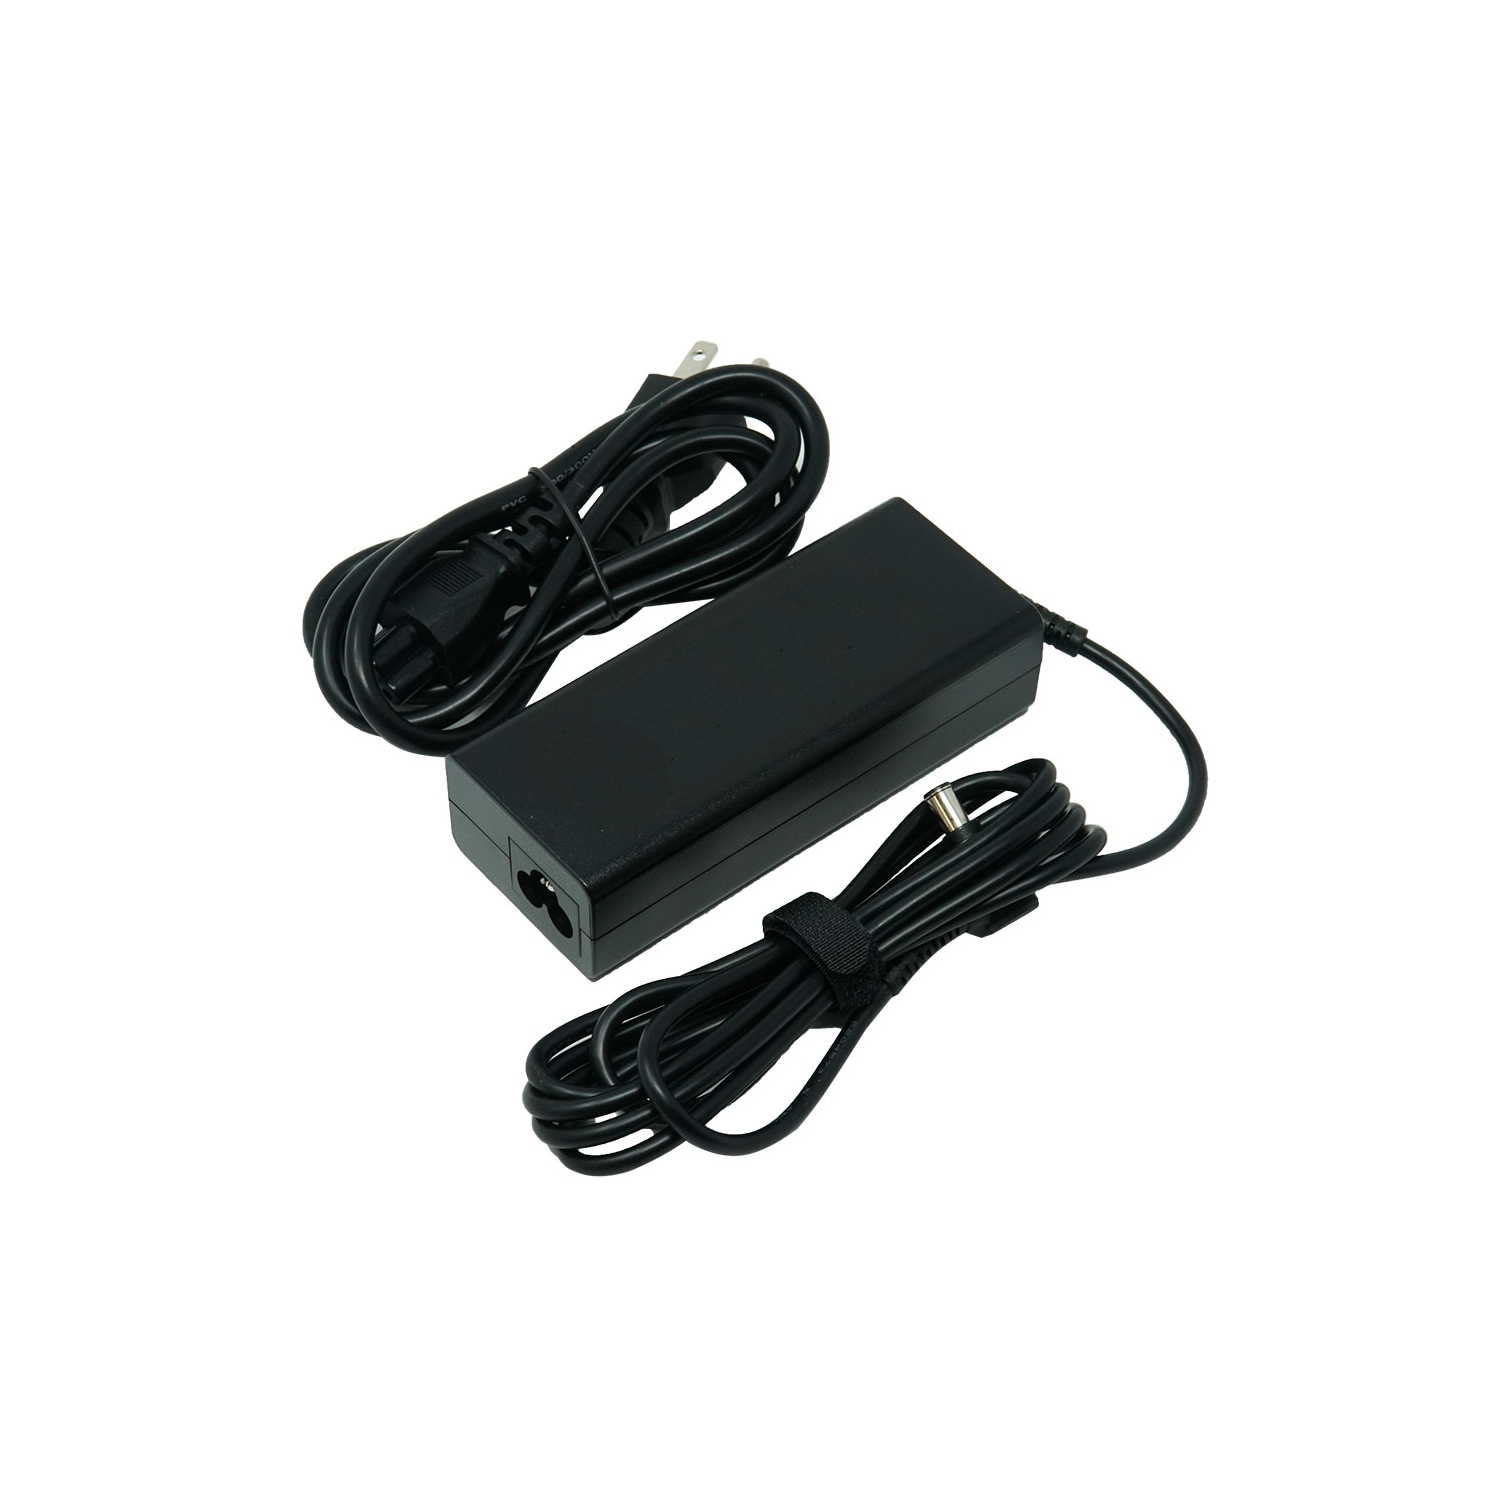 Dr. Battery - Notebook Adapter for LG Widebook R590 / P430-K / R480 / R490 / VGP-AC19V71 / VGP-AC19V76 - Free Shipping